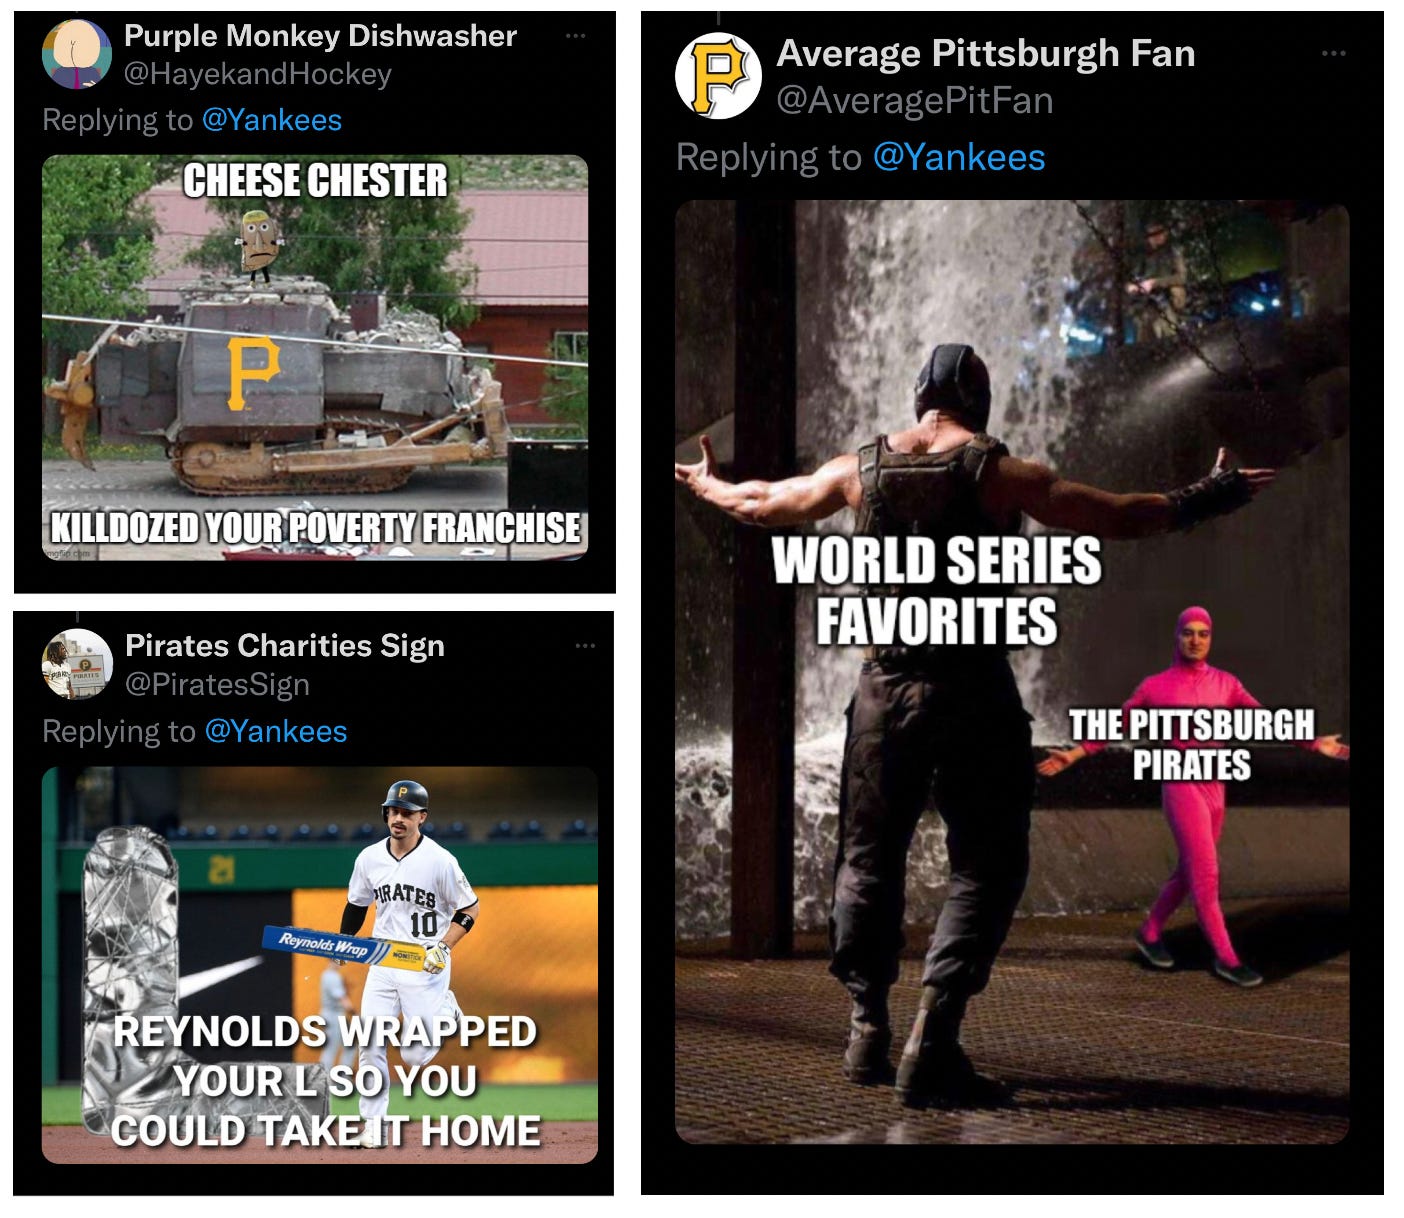 A sampling of memes about the Pirates. The first shows a Pirate Pierogie atop a military tank with the words Cheese Chester Killdozed your poverty franchise. The second shows Bryan Reynolds rounding a base holding Reynolds wrap foil with the words Reynolds Wrapped your L so you could take it home. The last shows a large strong man beckoning a fight with a small pink onesie wearing man also beckoning a fight. The large man is labeled World Series Favorite and the small man is labeled The Pittsburgh Pirates